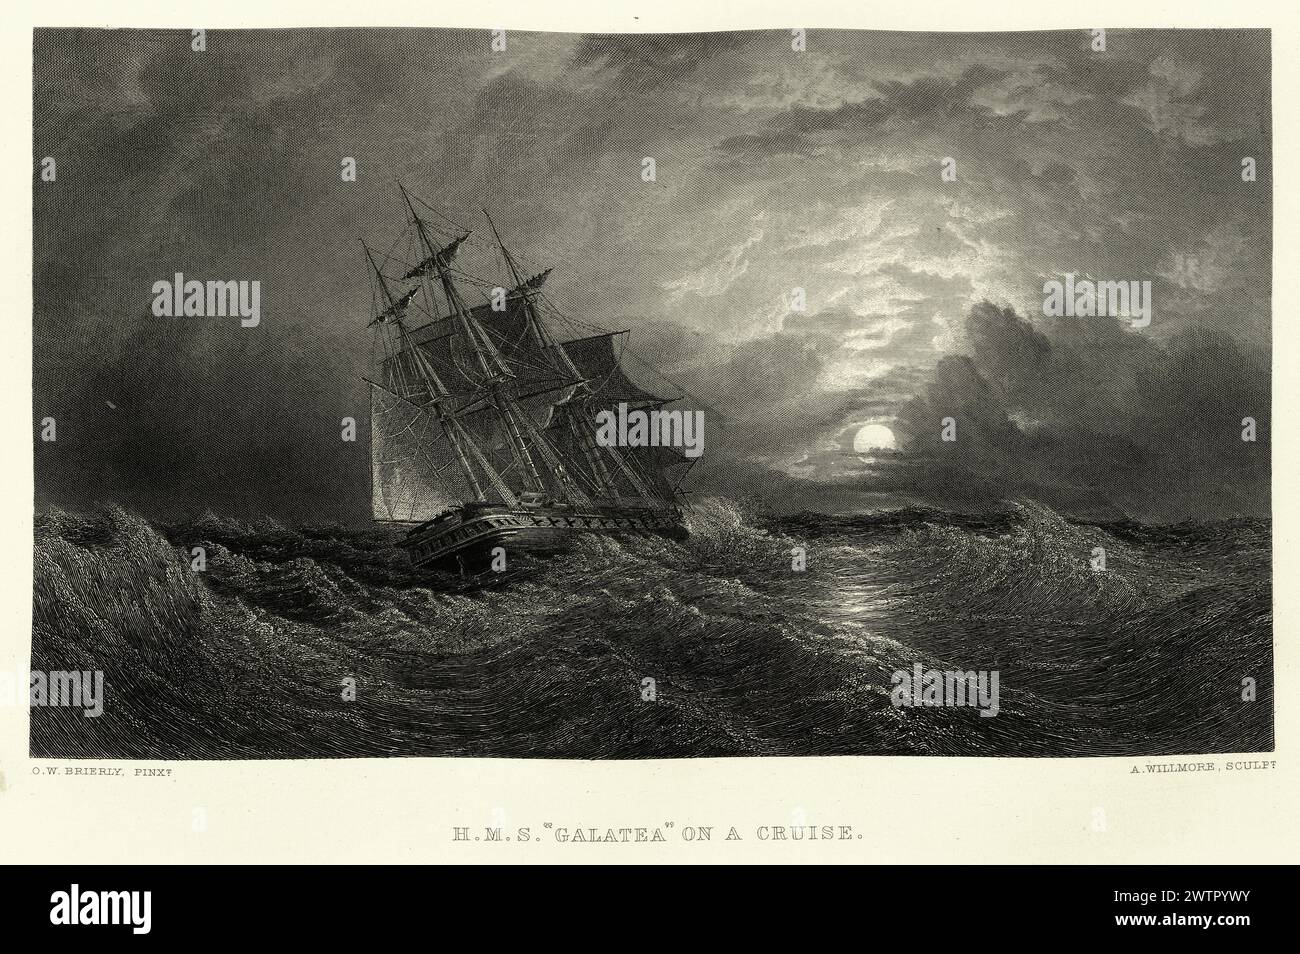 Vintage illustration HMS Galatea on a cruise, Royal navy warship sailing out of a storm, 19th Century art Stock Photo